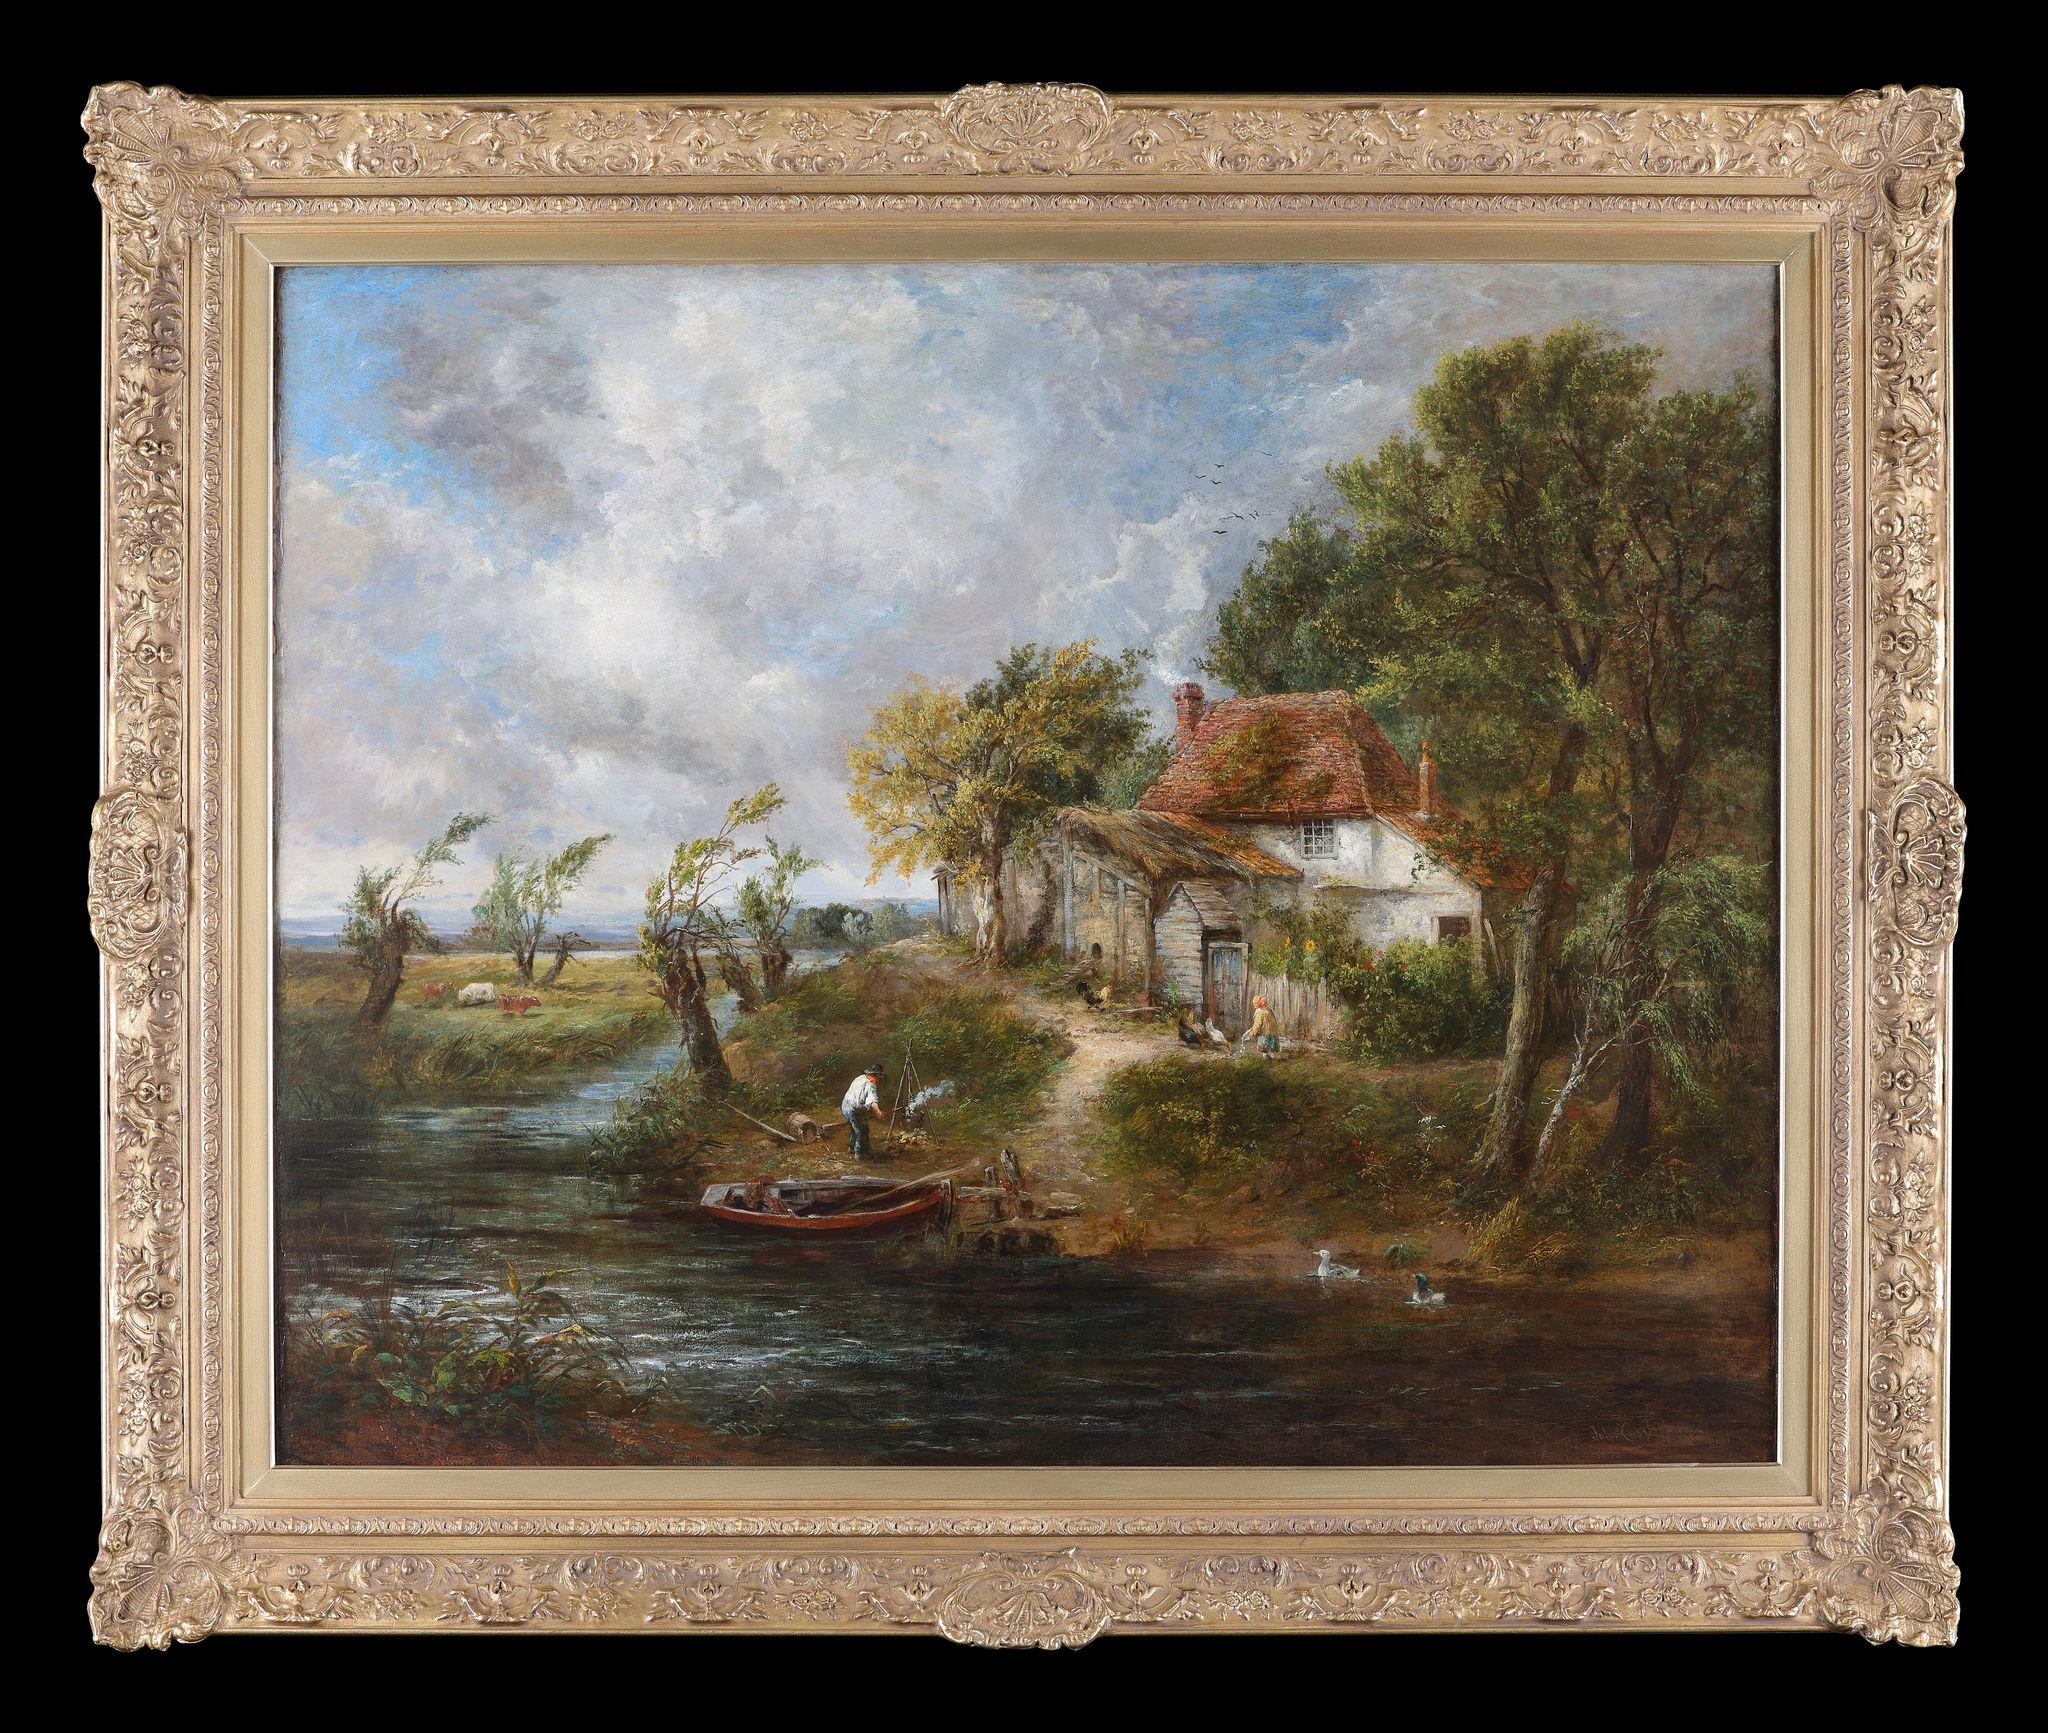 (Circle of) John Constable Landscape Painting - A Country Scene With a Woman Feeding the Chickens